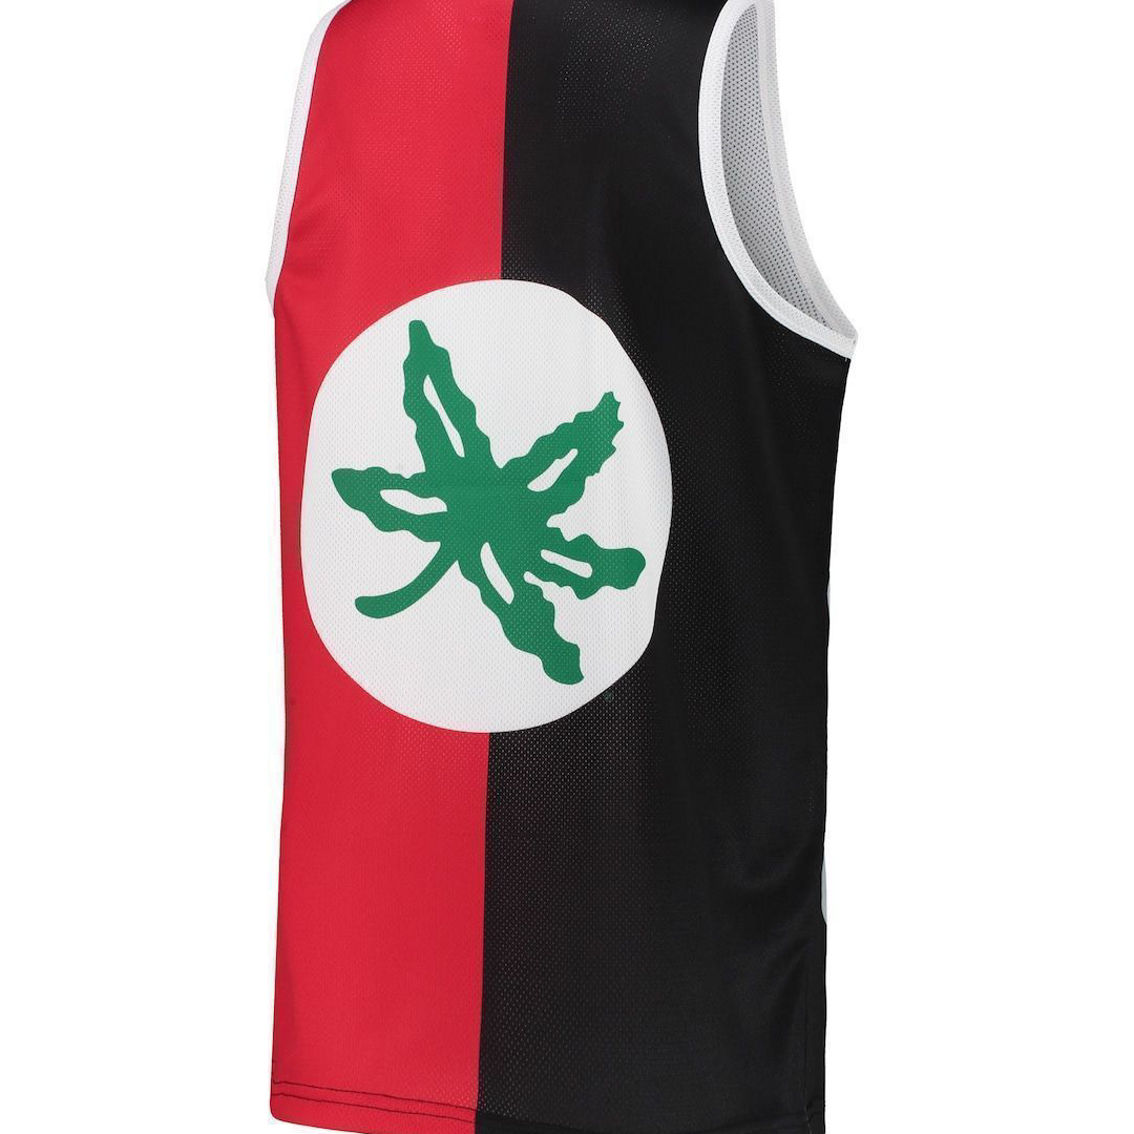 Mitchell & Ness Men's Eddie George Black/Scarlet Ohio State Buckeyes Sublimated Player Tank Top - Image 4 of 4